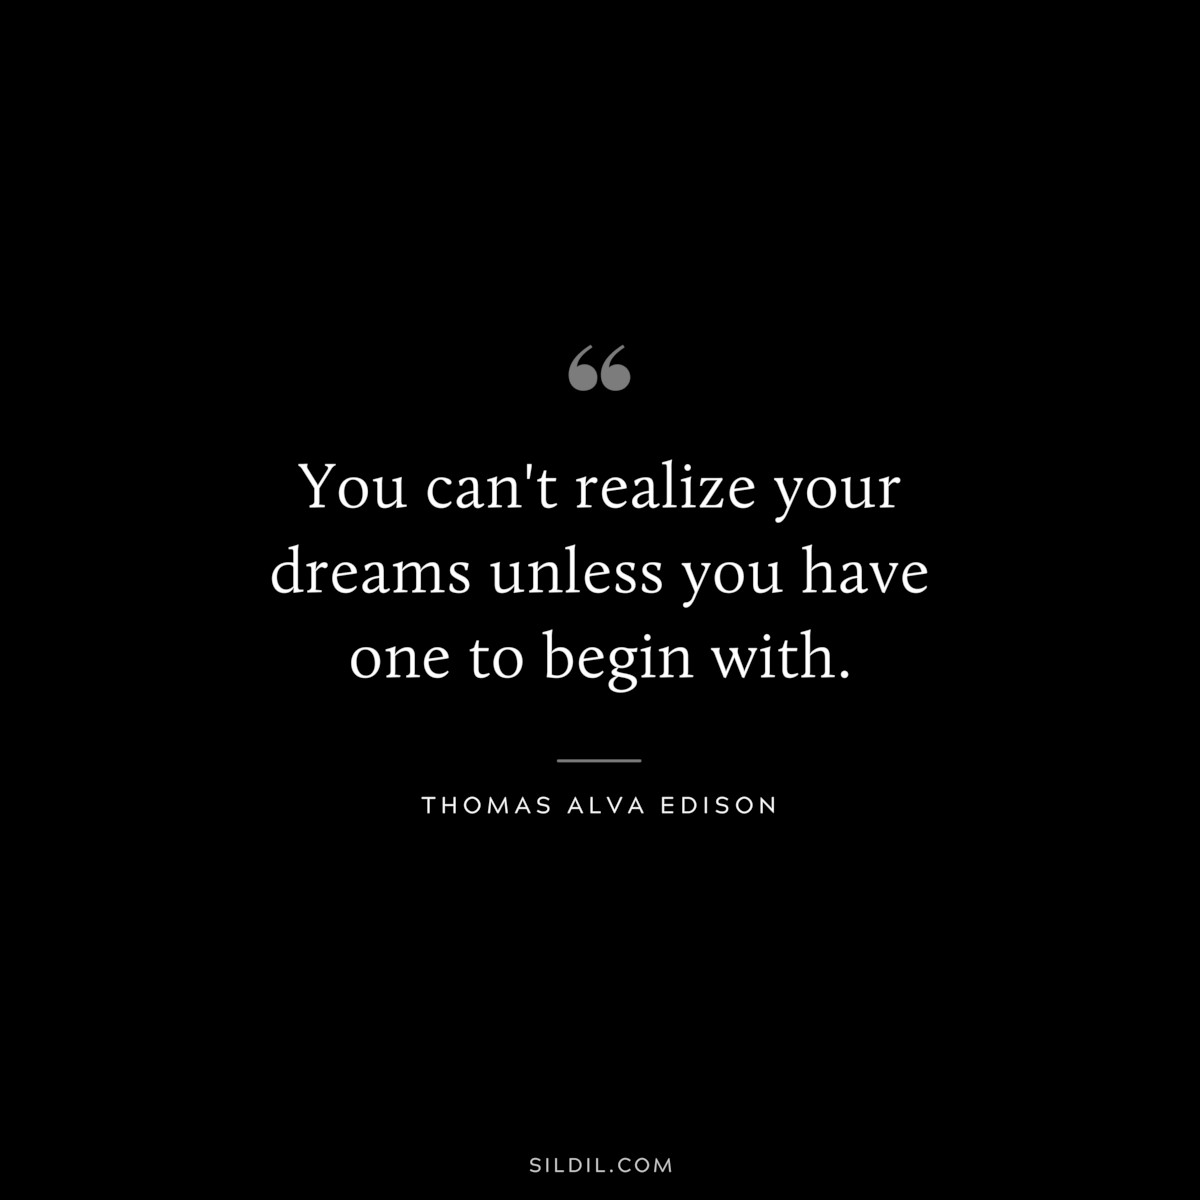 You can't realize your dreams unless you have one to begin with. ― Thomas Alva Edison